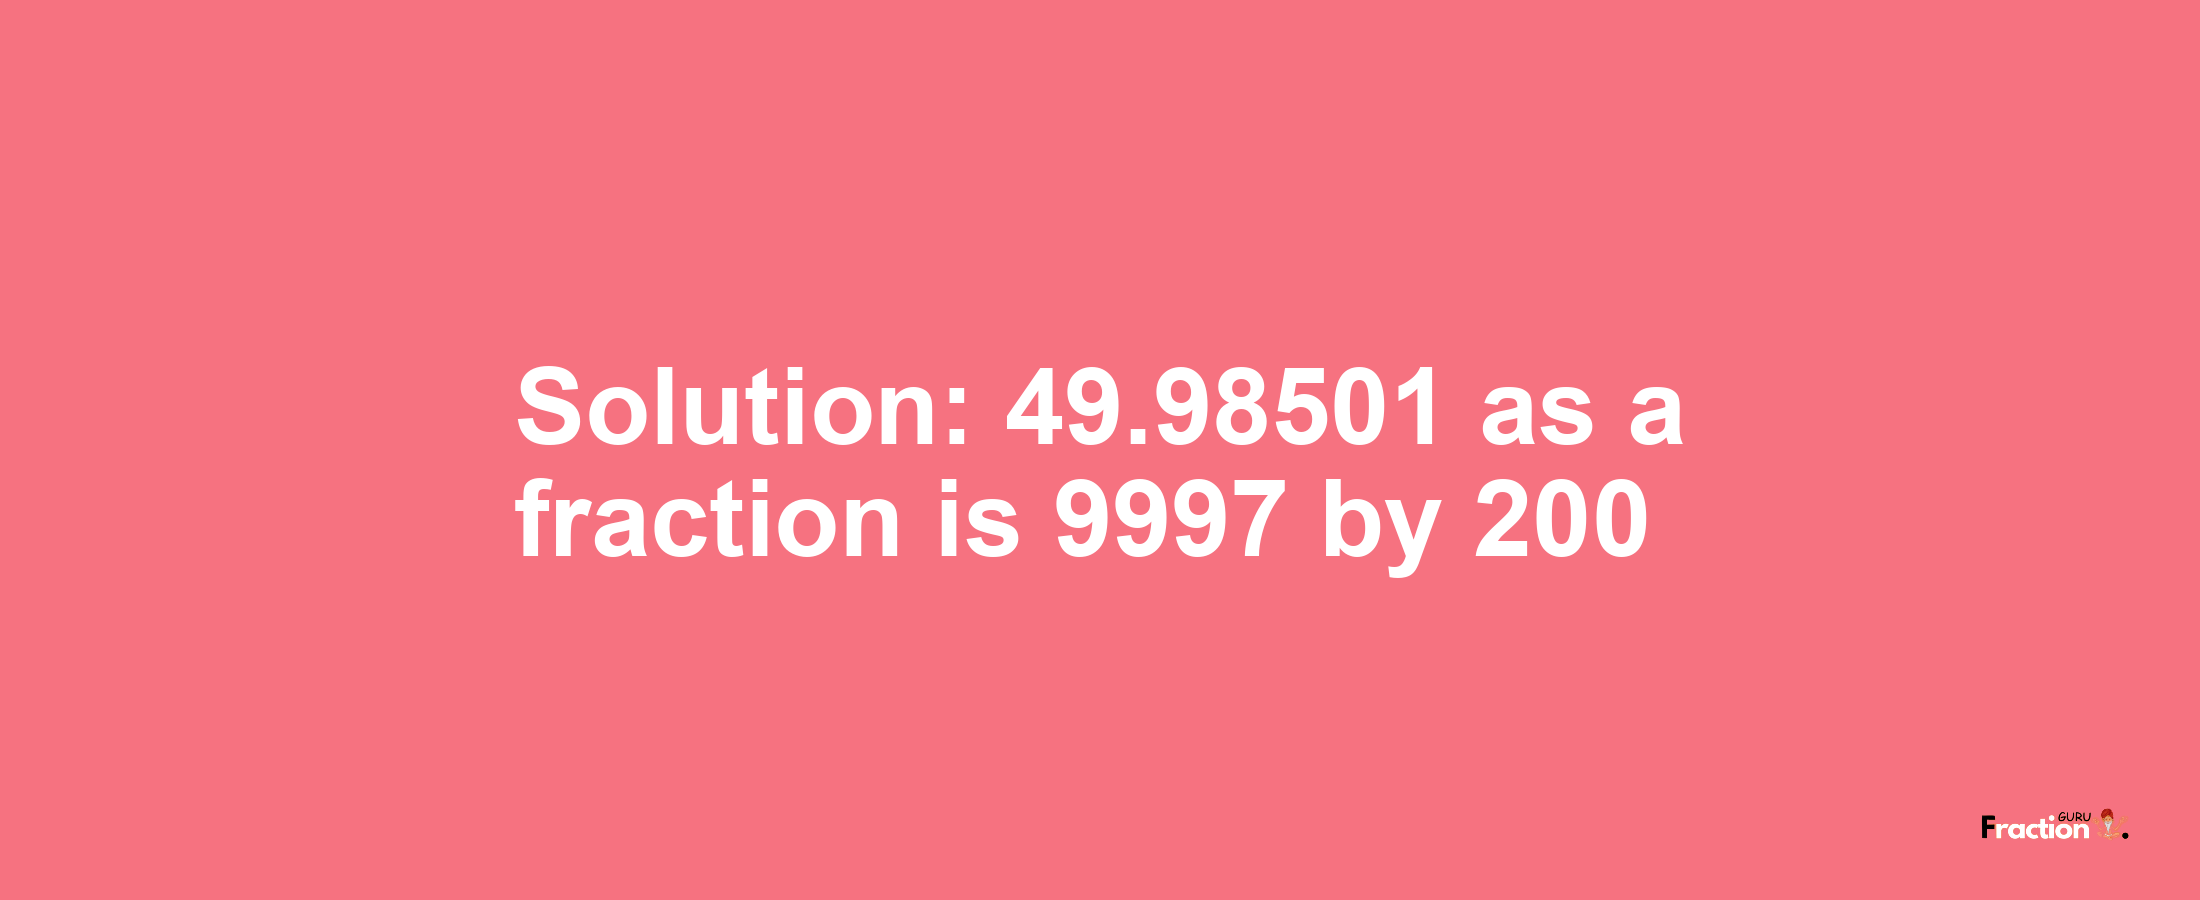 Solution:49.98501 as a fraction is 9997/200